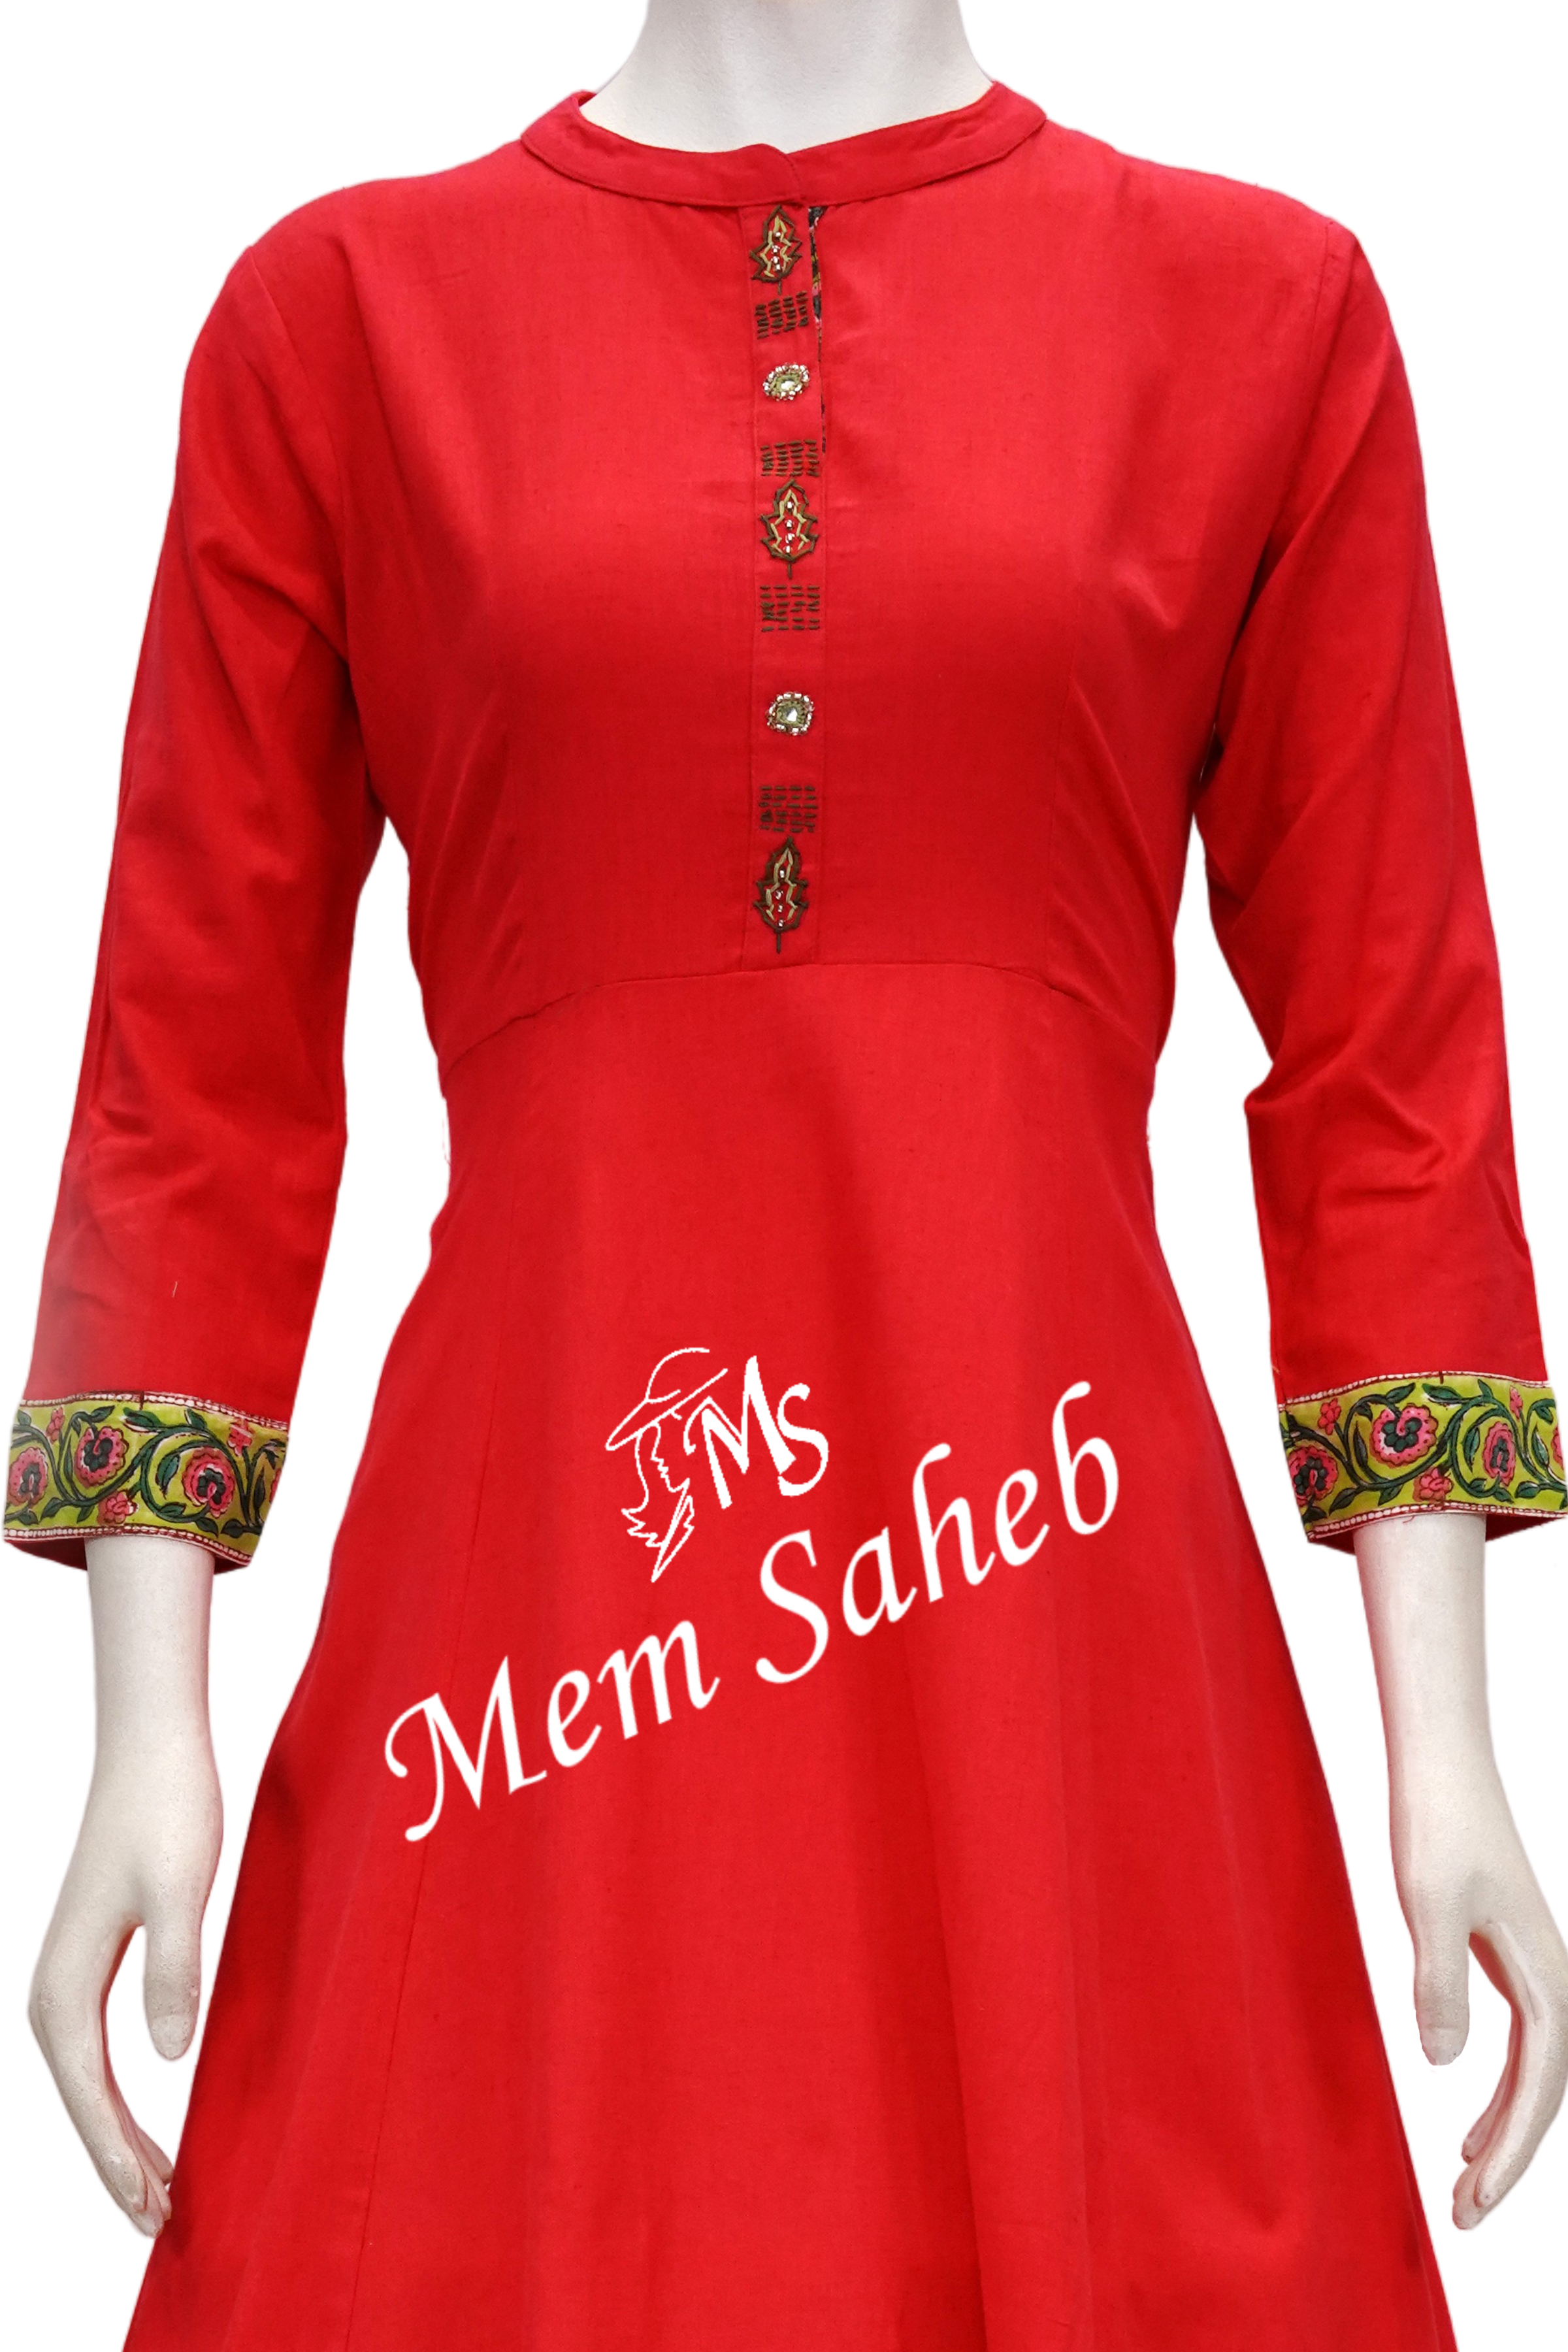 Buy Diamond Design Hand Print Cotton Kurti with floral border at Amazon.in